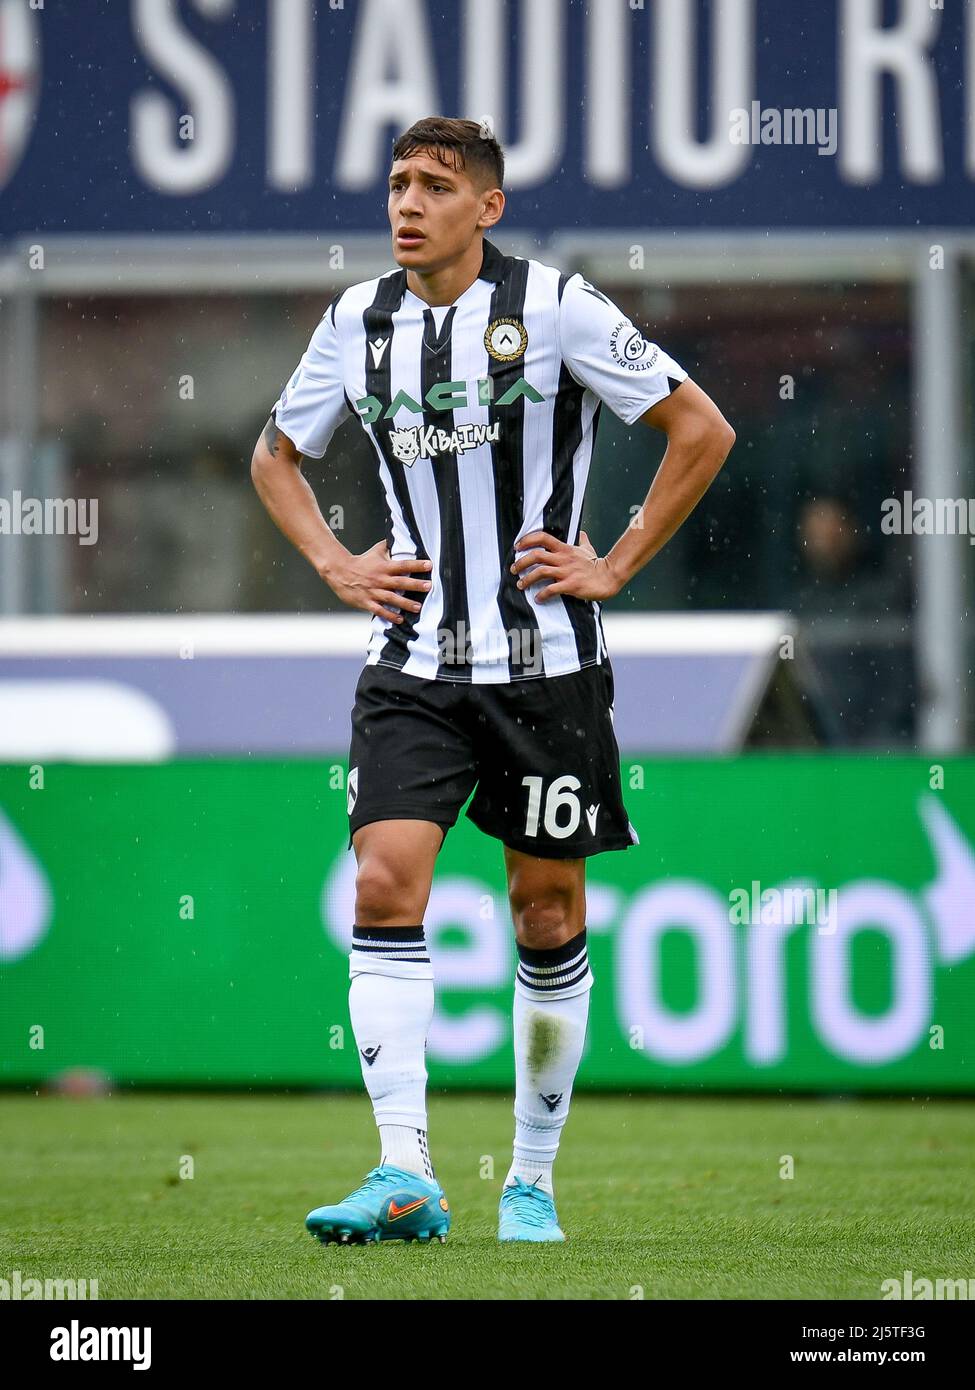 Bologna, Italy. 24th Apr, 2022. Udinese's Nahuel Molina portrait during  Bologna FC vs Udinese Calcio, italian soccer Serie A match in Bologna, Italy,  April 24 2022 Credit: Independent Photo Agency/Alamy Live News